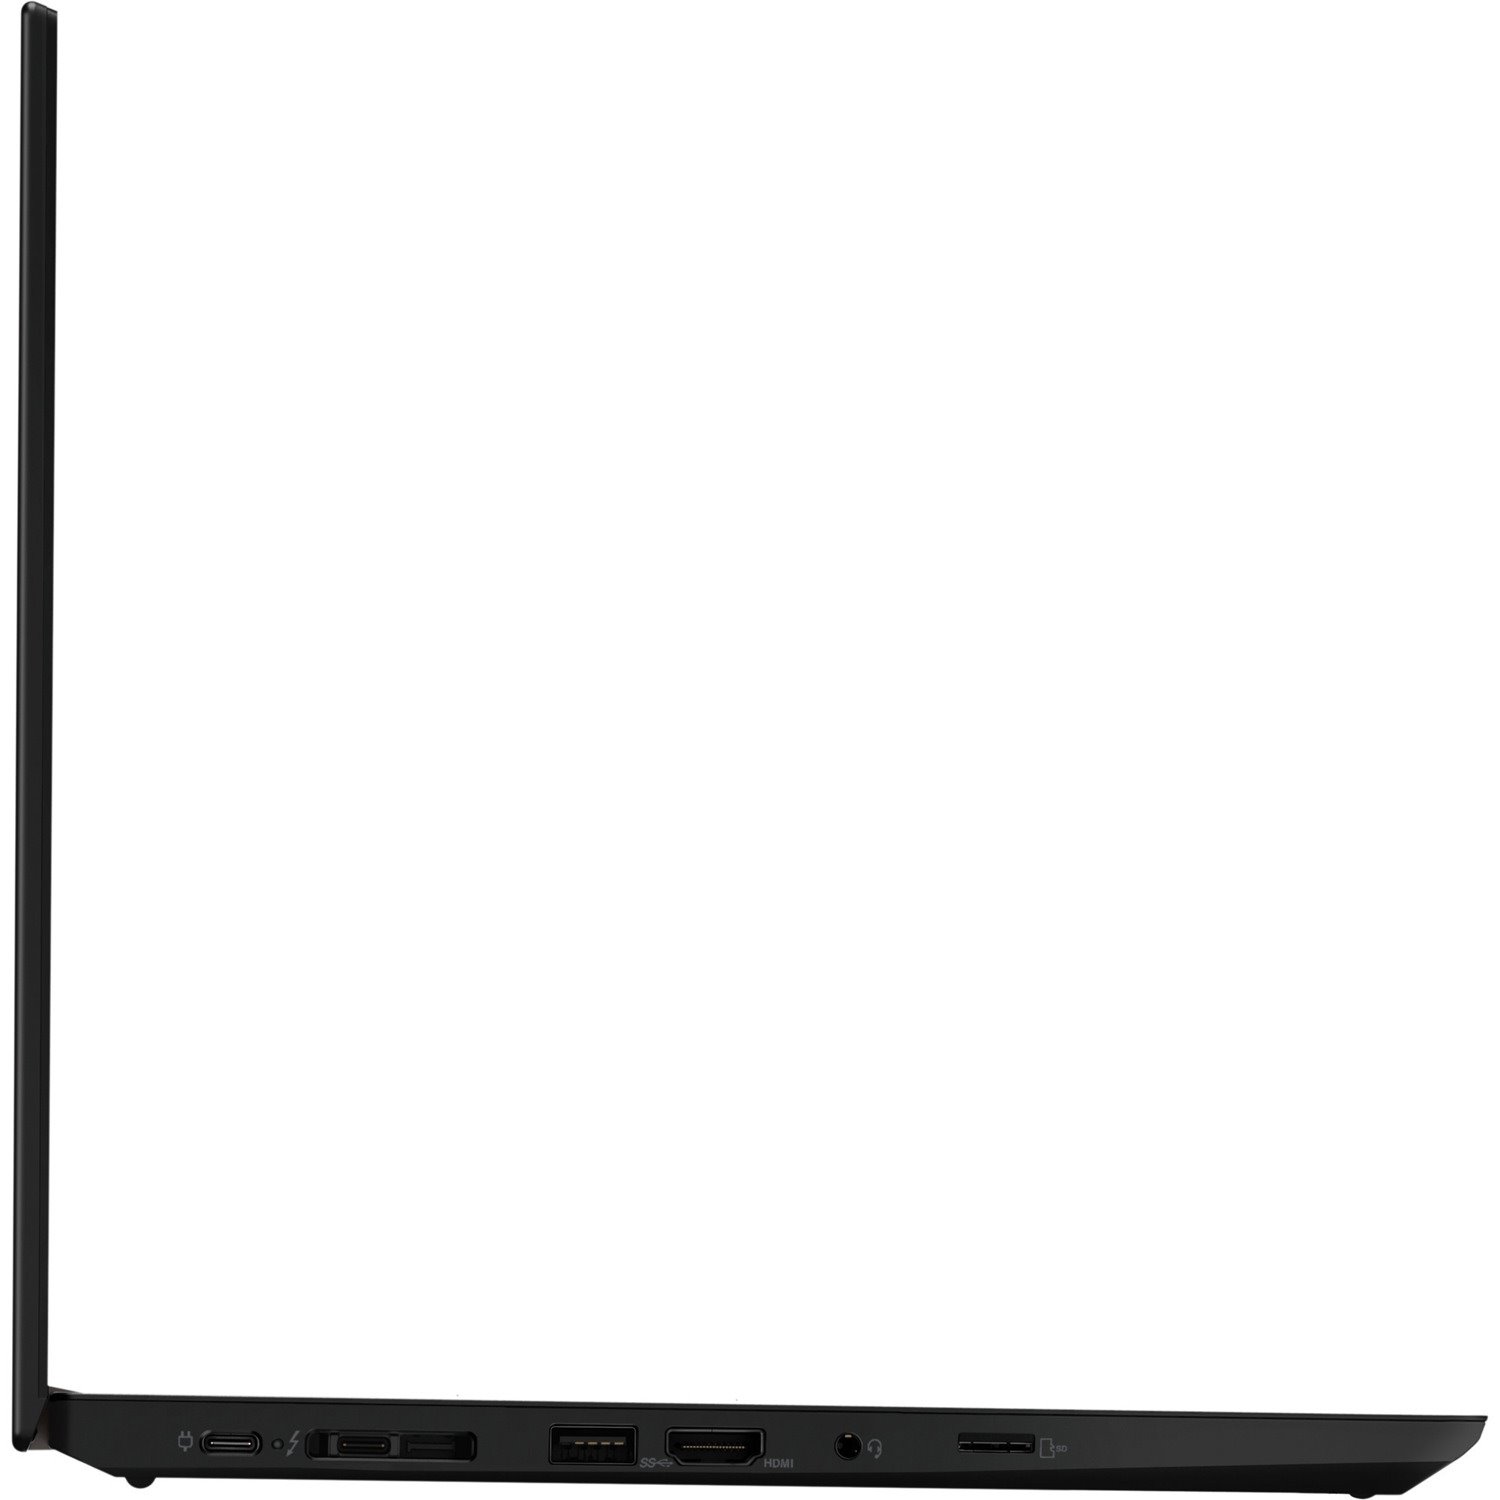 Lenovo ThinkPad T14 Gen 2 20W000T3US 14" Notebook - Full HD - 1920 x 1080 - Intel Core i5 11th Gen i5-1145G7 Quad-core (4 Core) 2.6GHz - 8GB Total RAM - 256GB SSD - no ethernet port - not compatible with mechanical docking stations